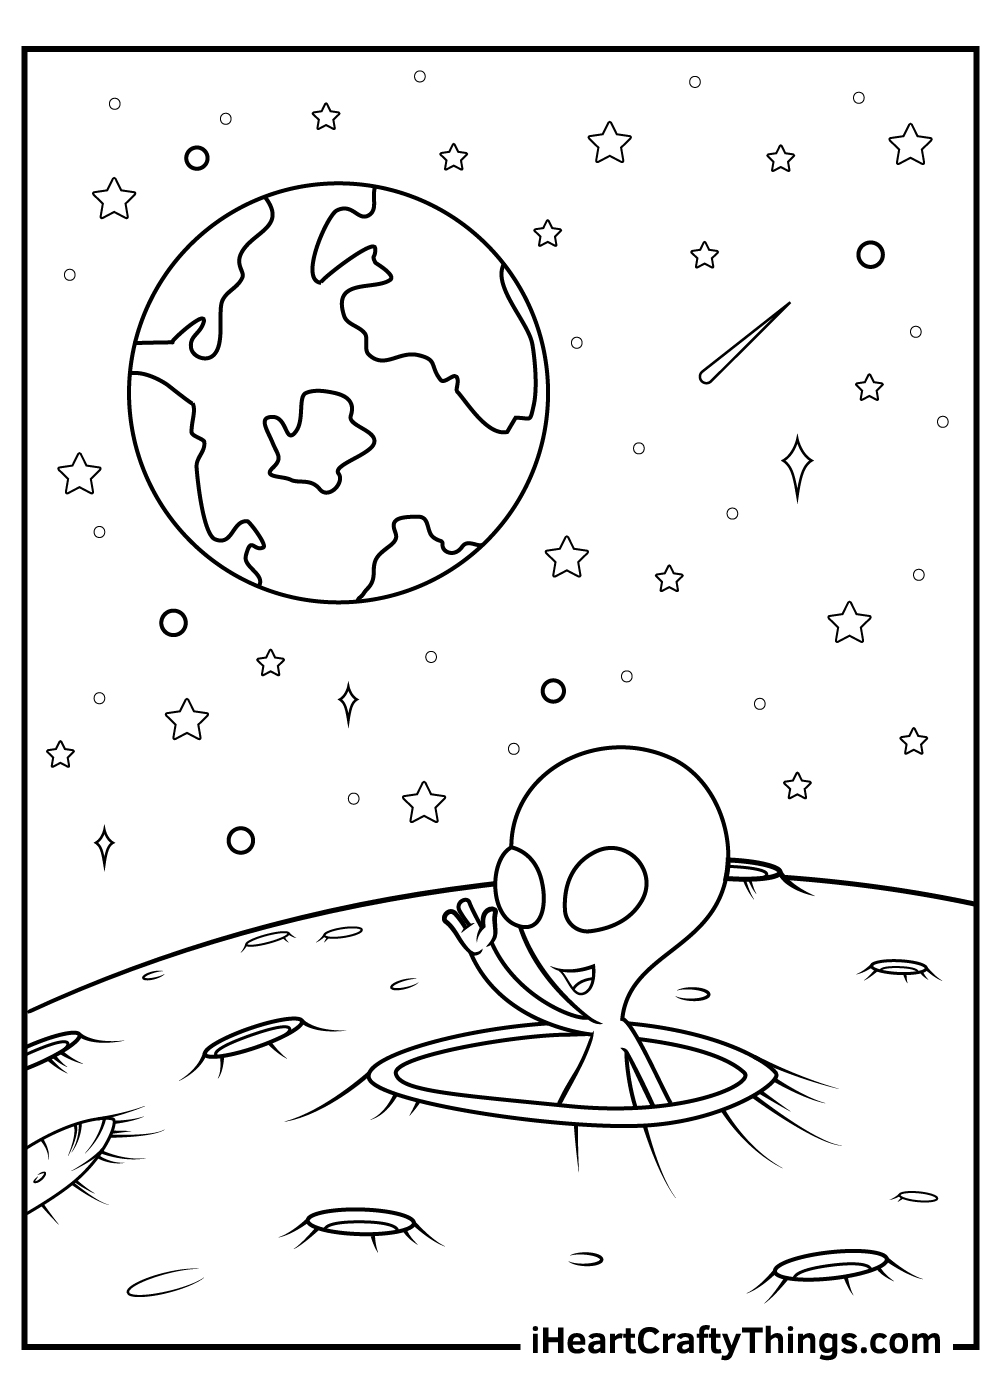 Alien Coloring Pages Updated 20